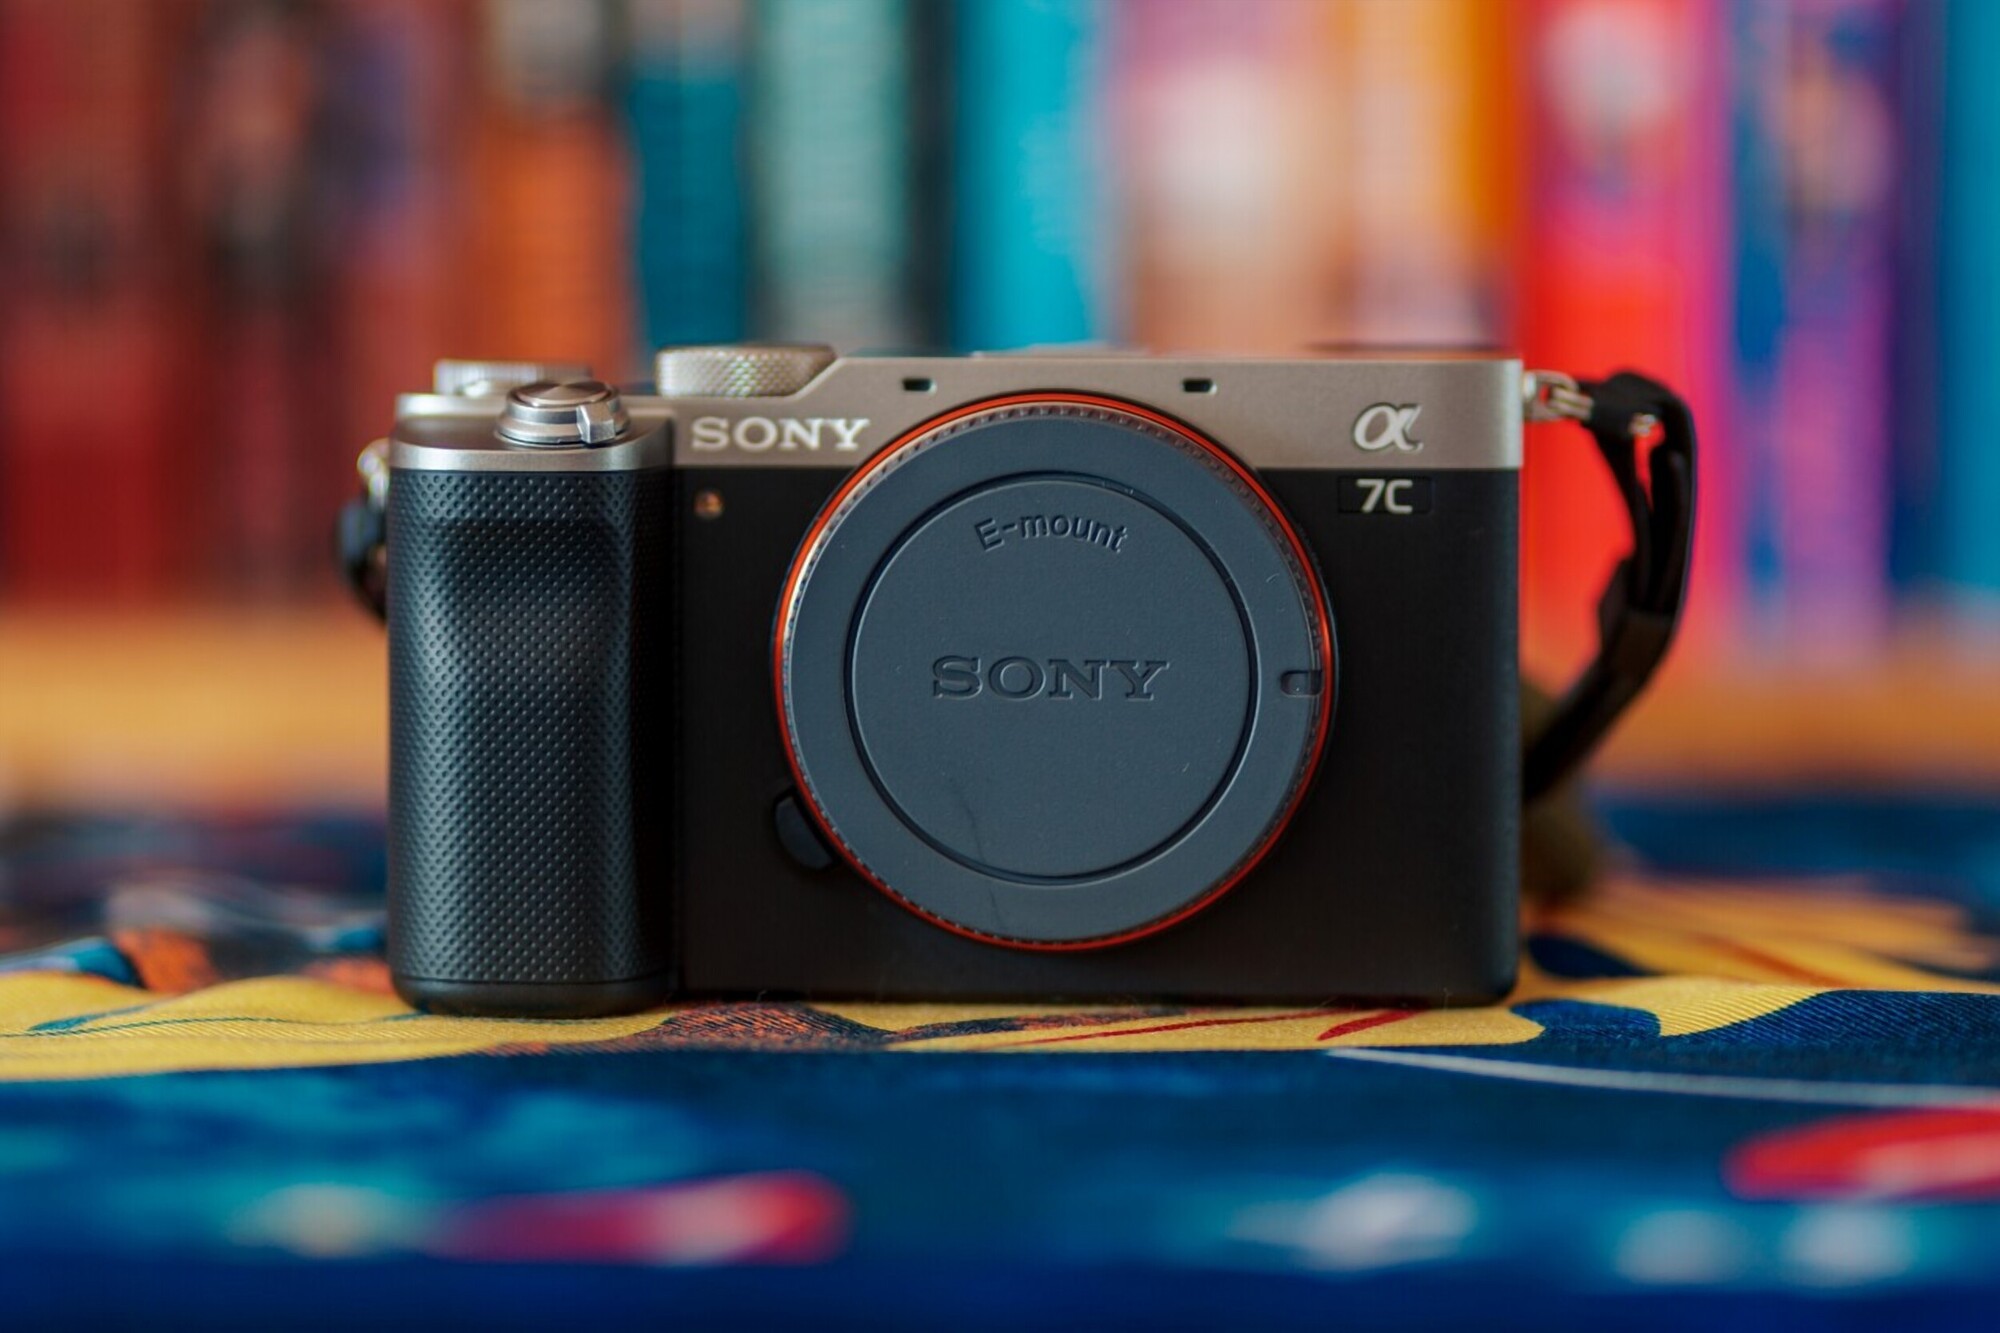 New gear: Sony a7C II and a7C R full-frame mirrorless cameras